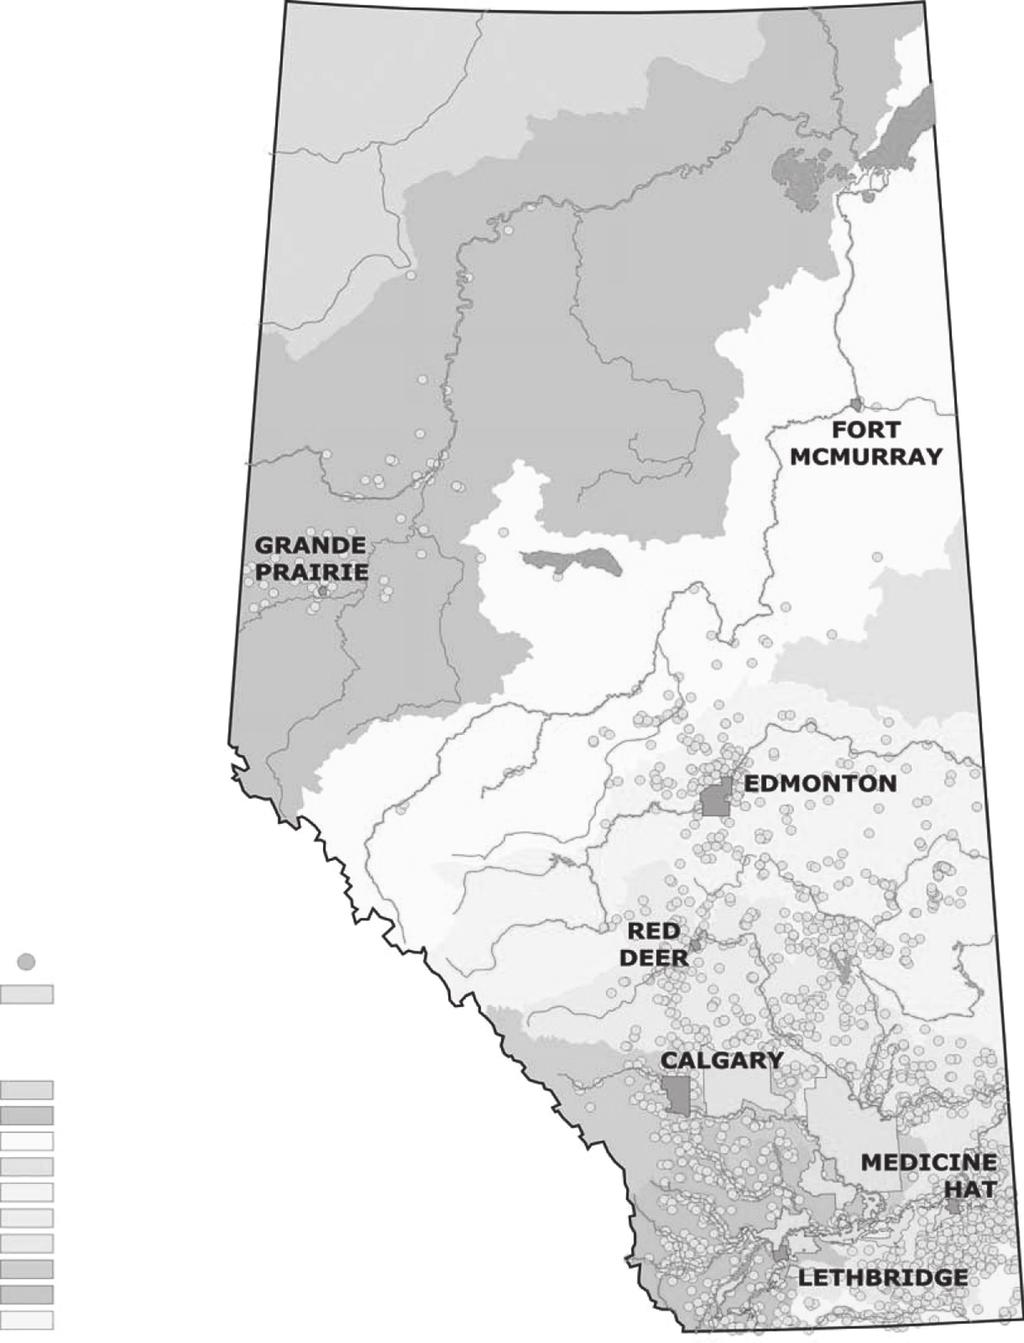 178 INCENTIVES AND INSTRUMENTS FOR SUSTAINABLE IRRIGATION LEGEND PRIVATE IRRIGATION IRRIGATION DISTRICTS ALBERTA RIVER BASINS HAY RIVER BASIN PEACE/SLAVE RIVER BASIN ATHABASCA RIVER BASIN BEAVER